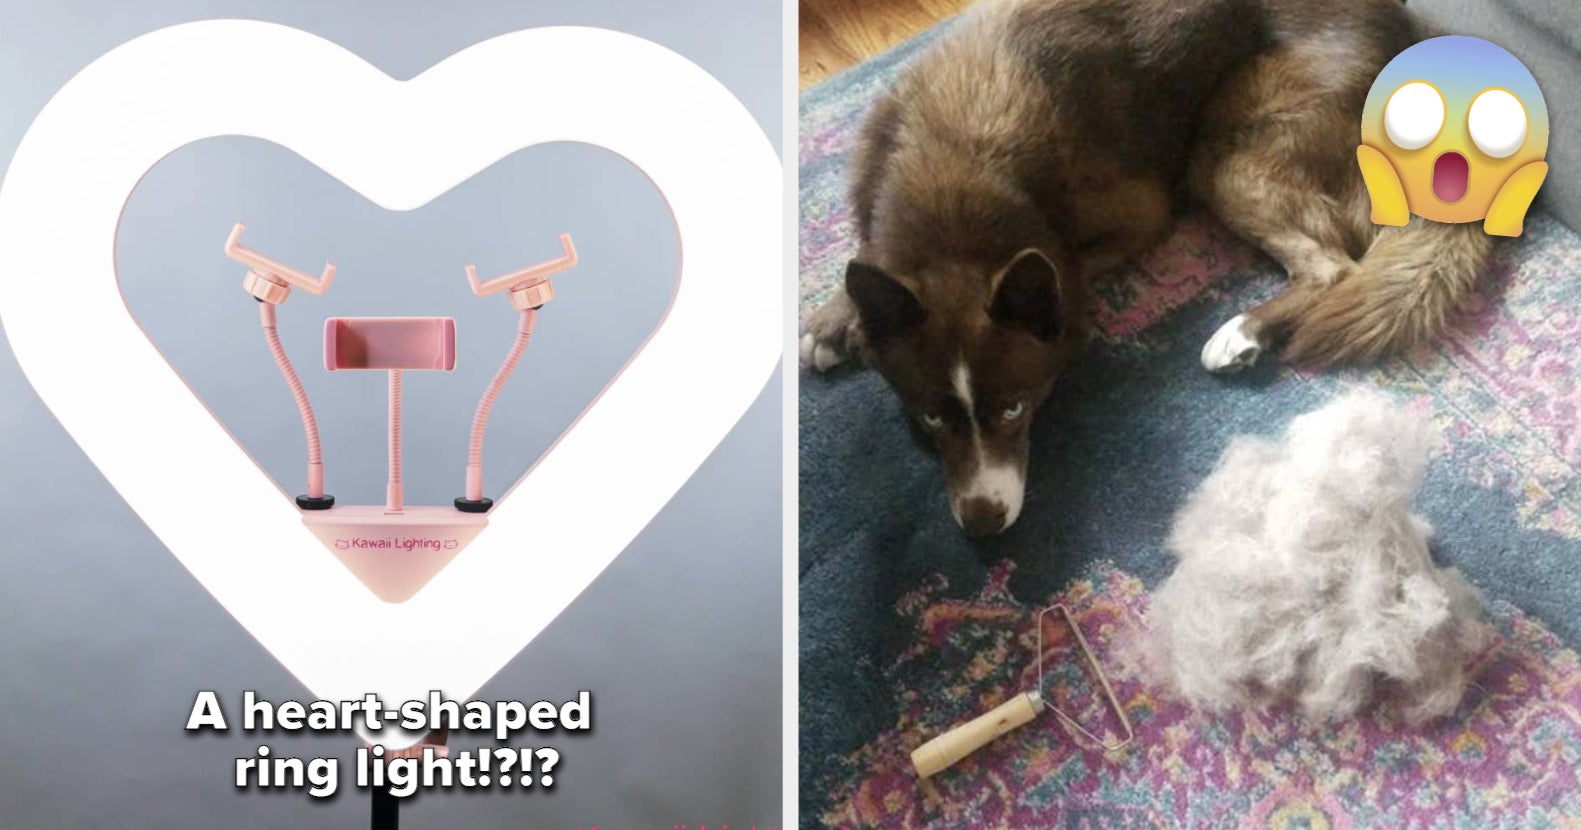 34 TikTok Made Me Buy It Products You Shouldn't Skip